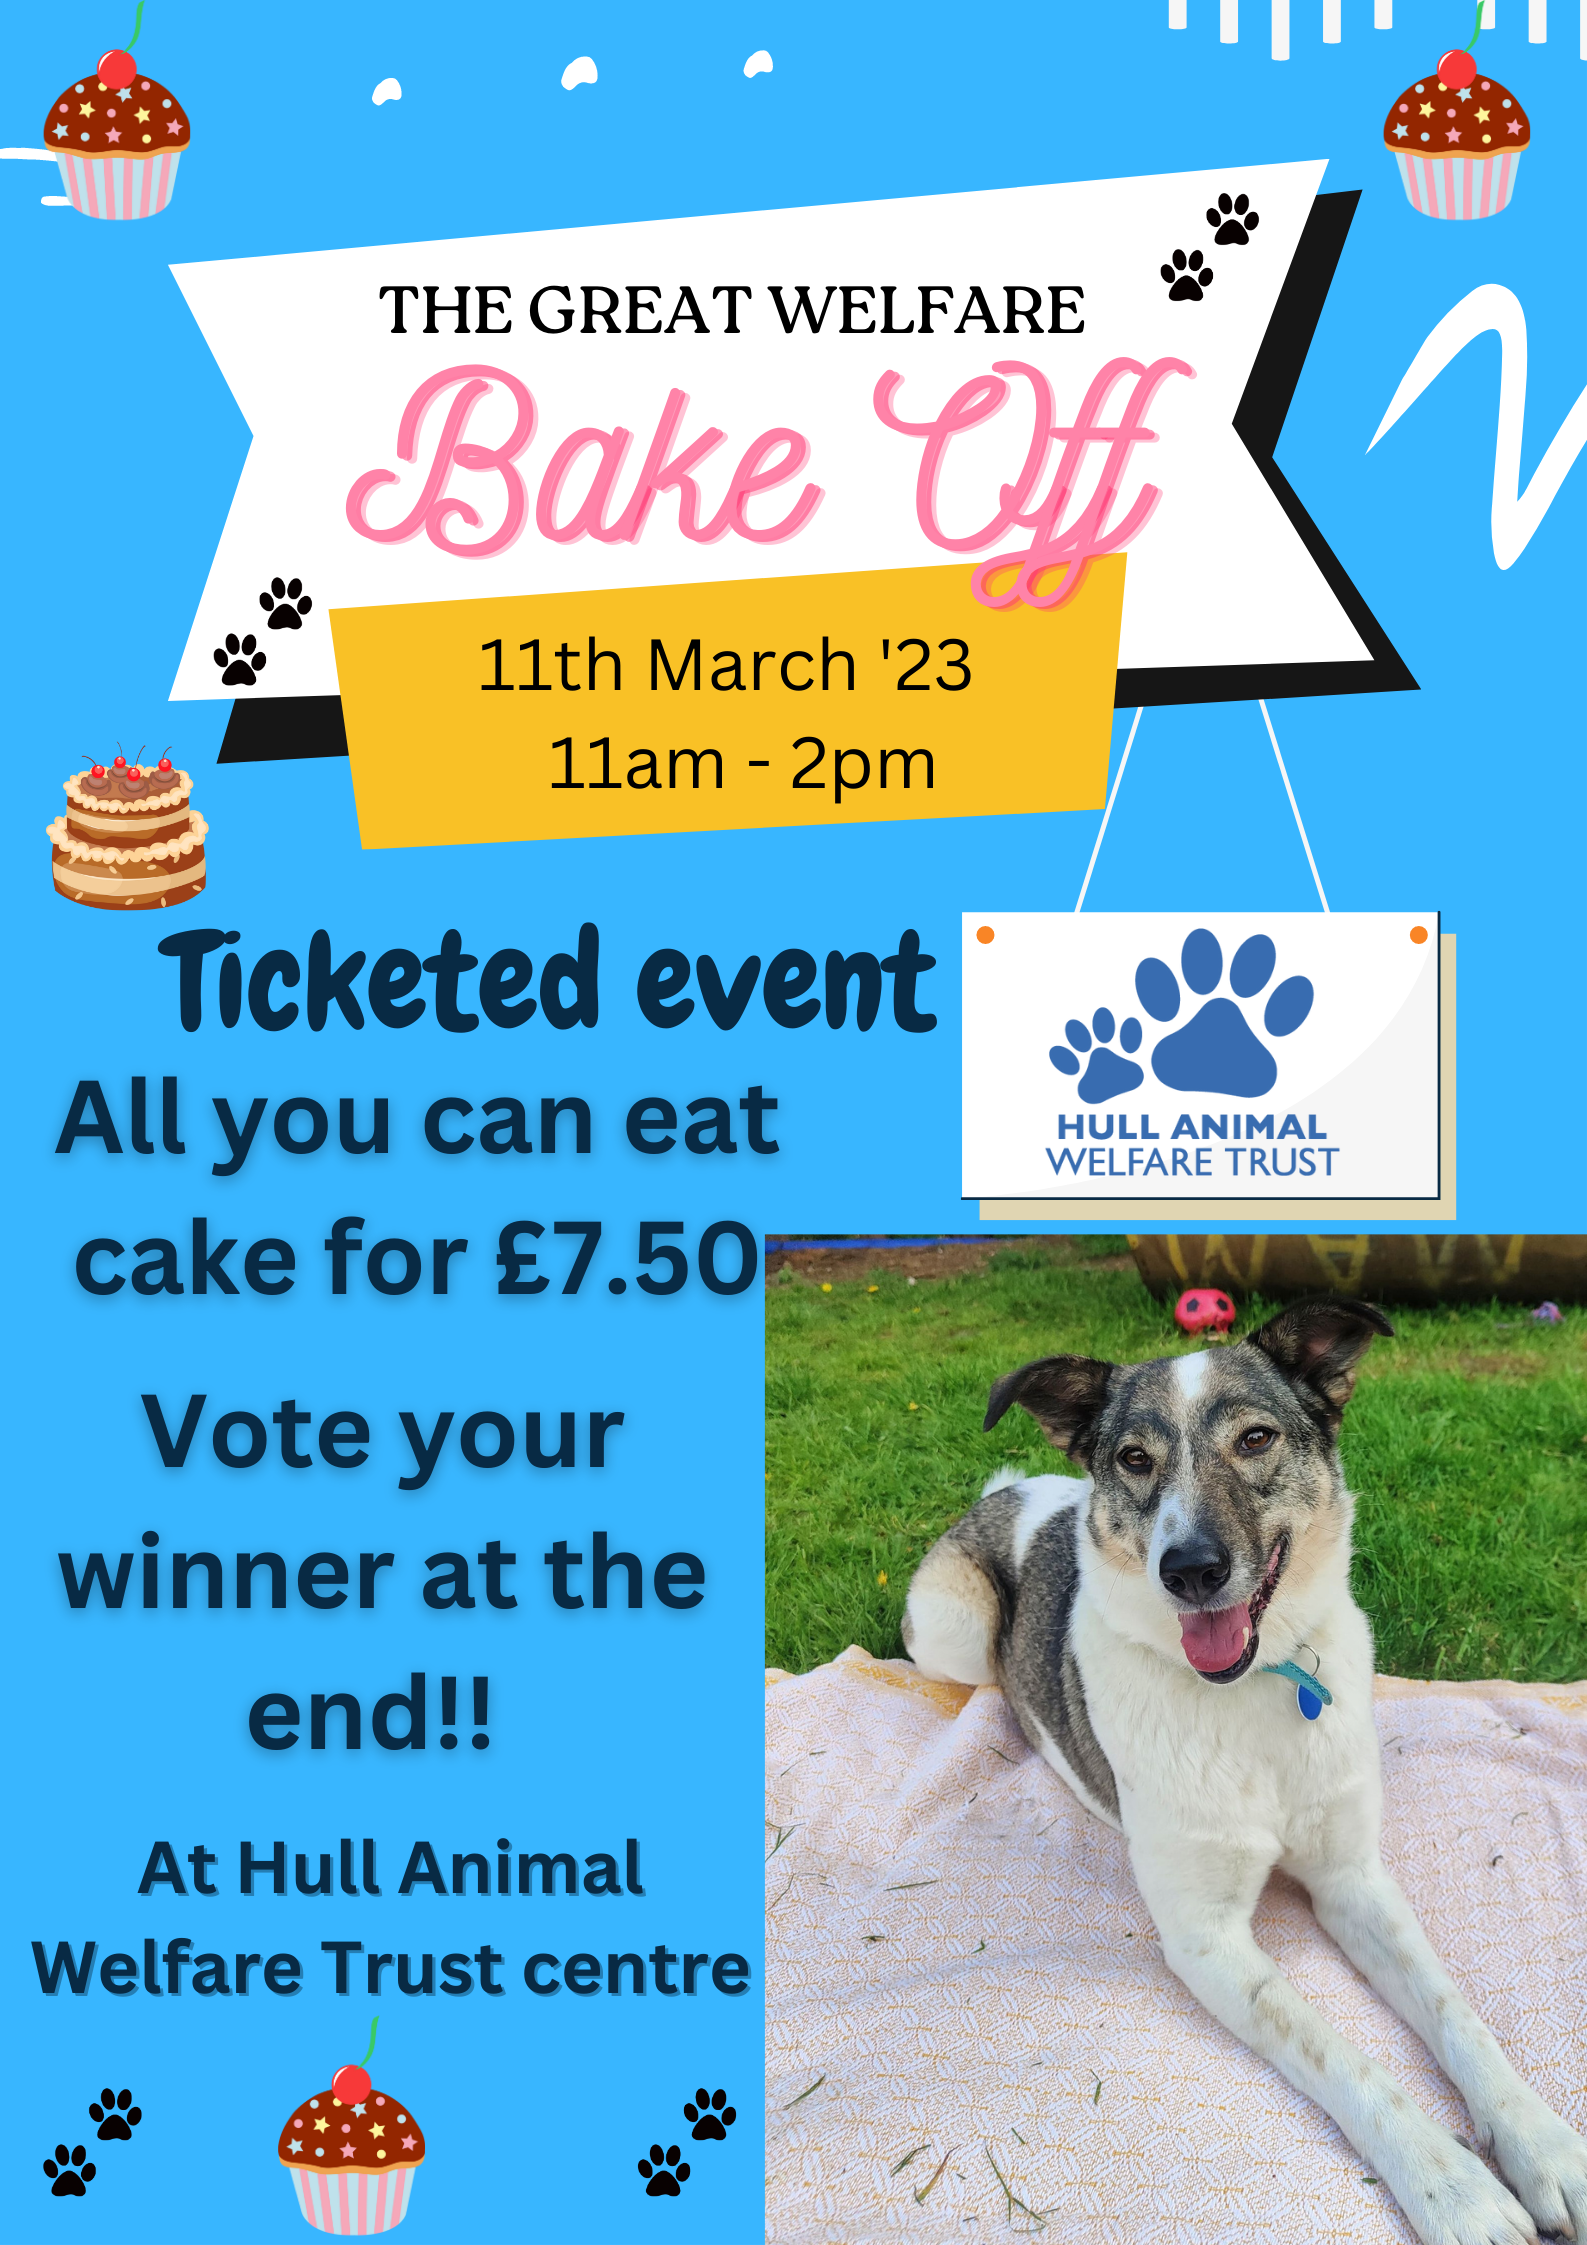 The Great Welfare Bake off – Saturday 11th March 2023 – Hull Animal Welfare